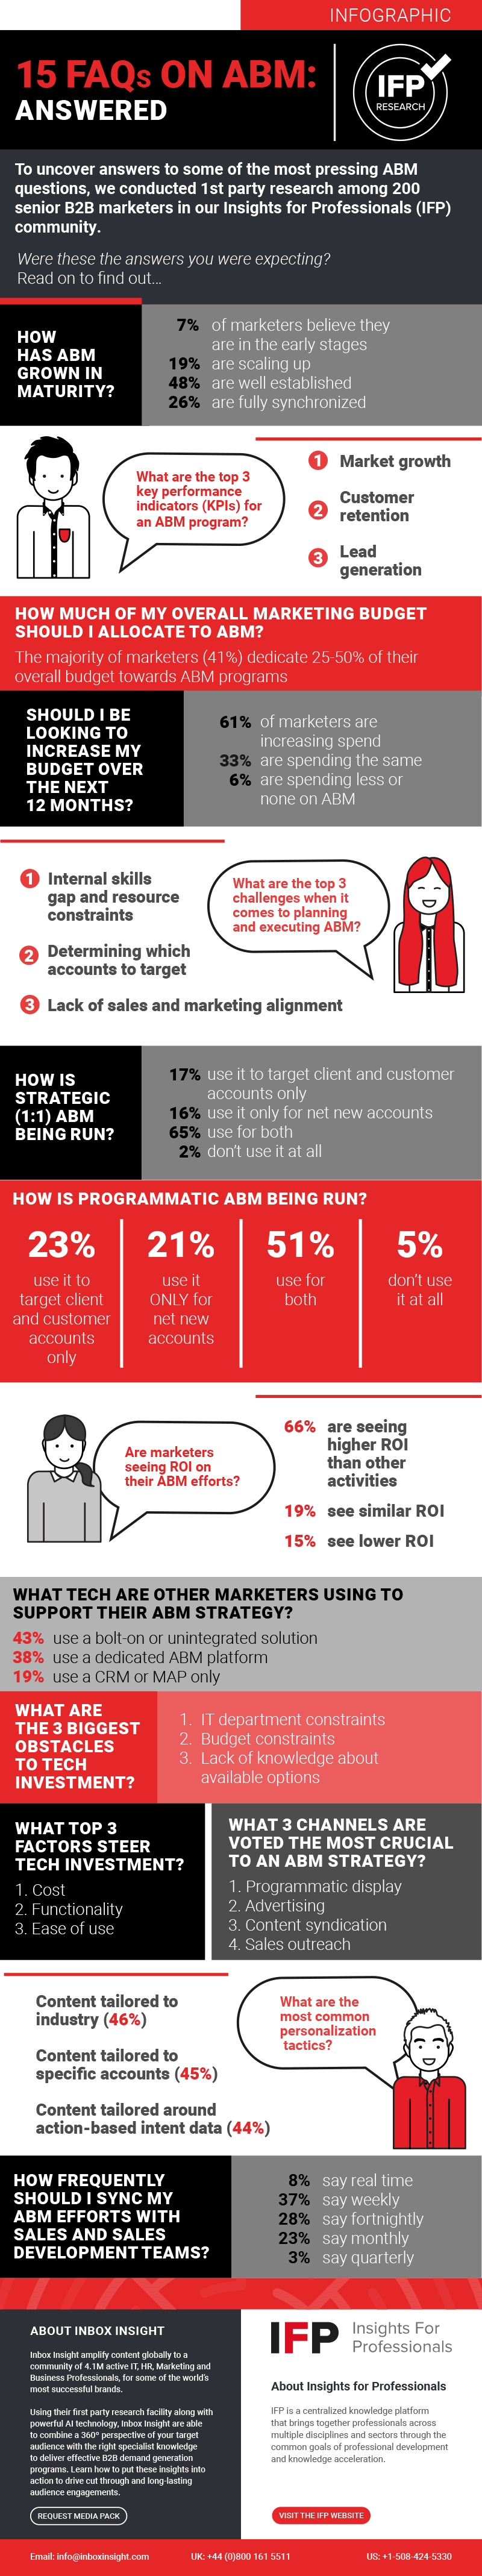 15 FAQs on ABM - ANSWERED